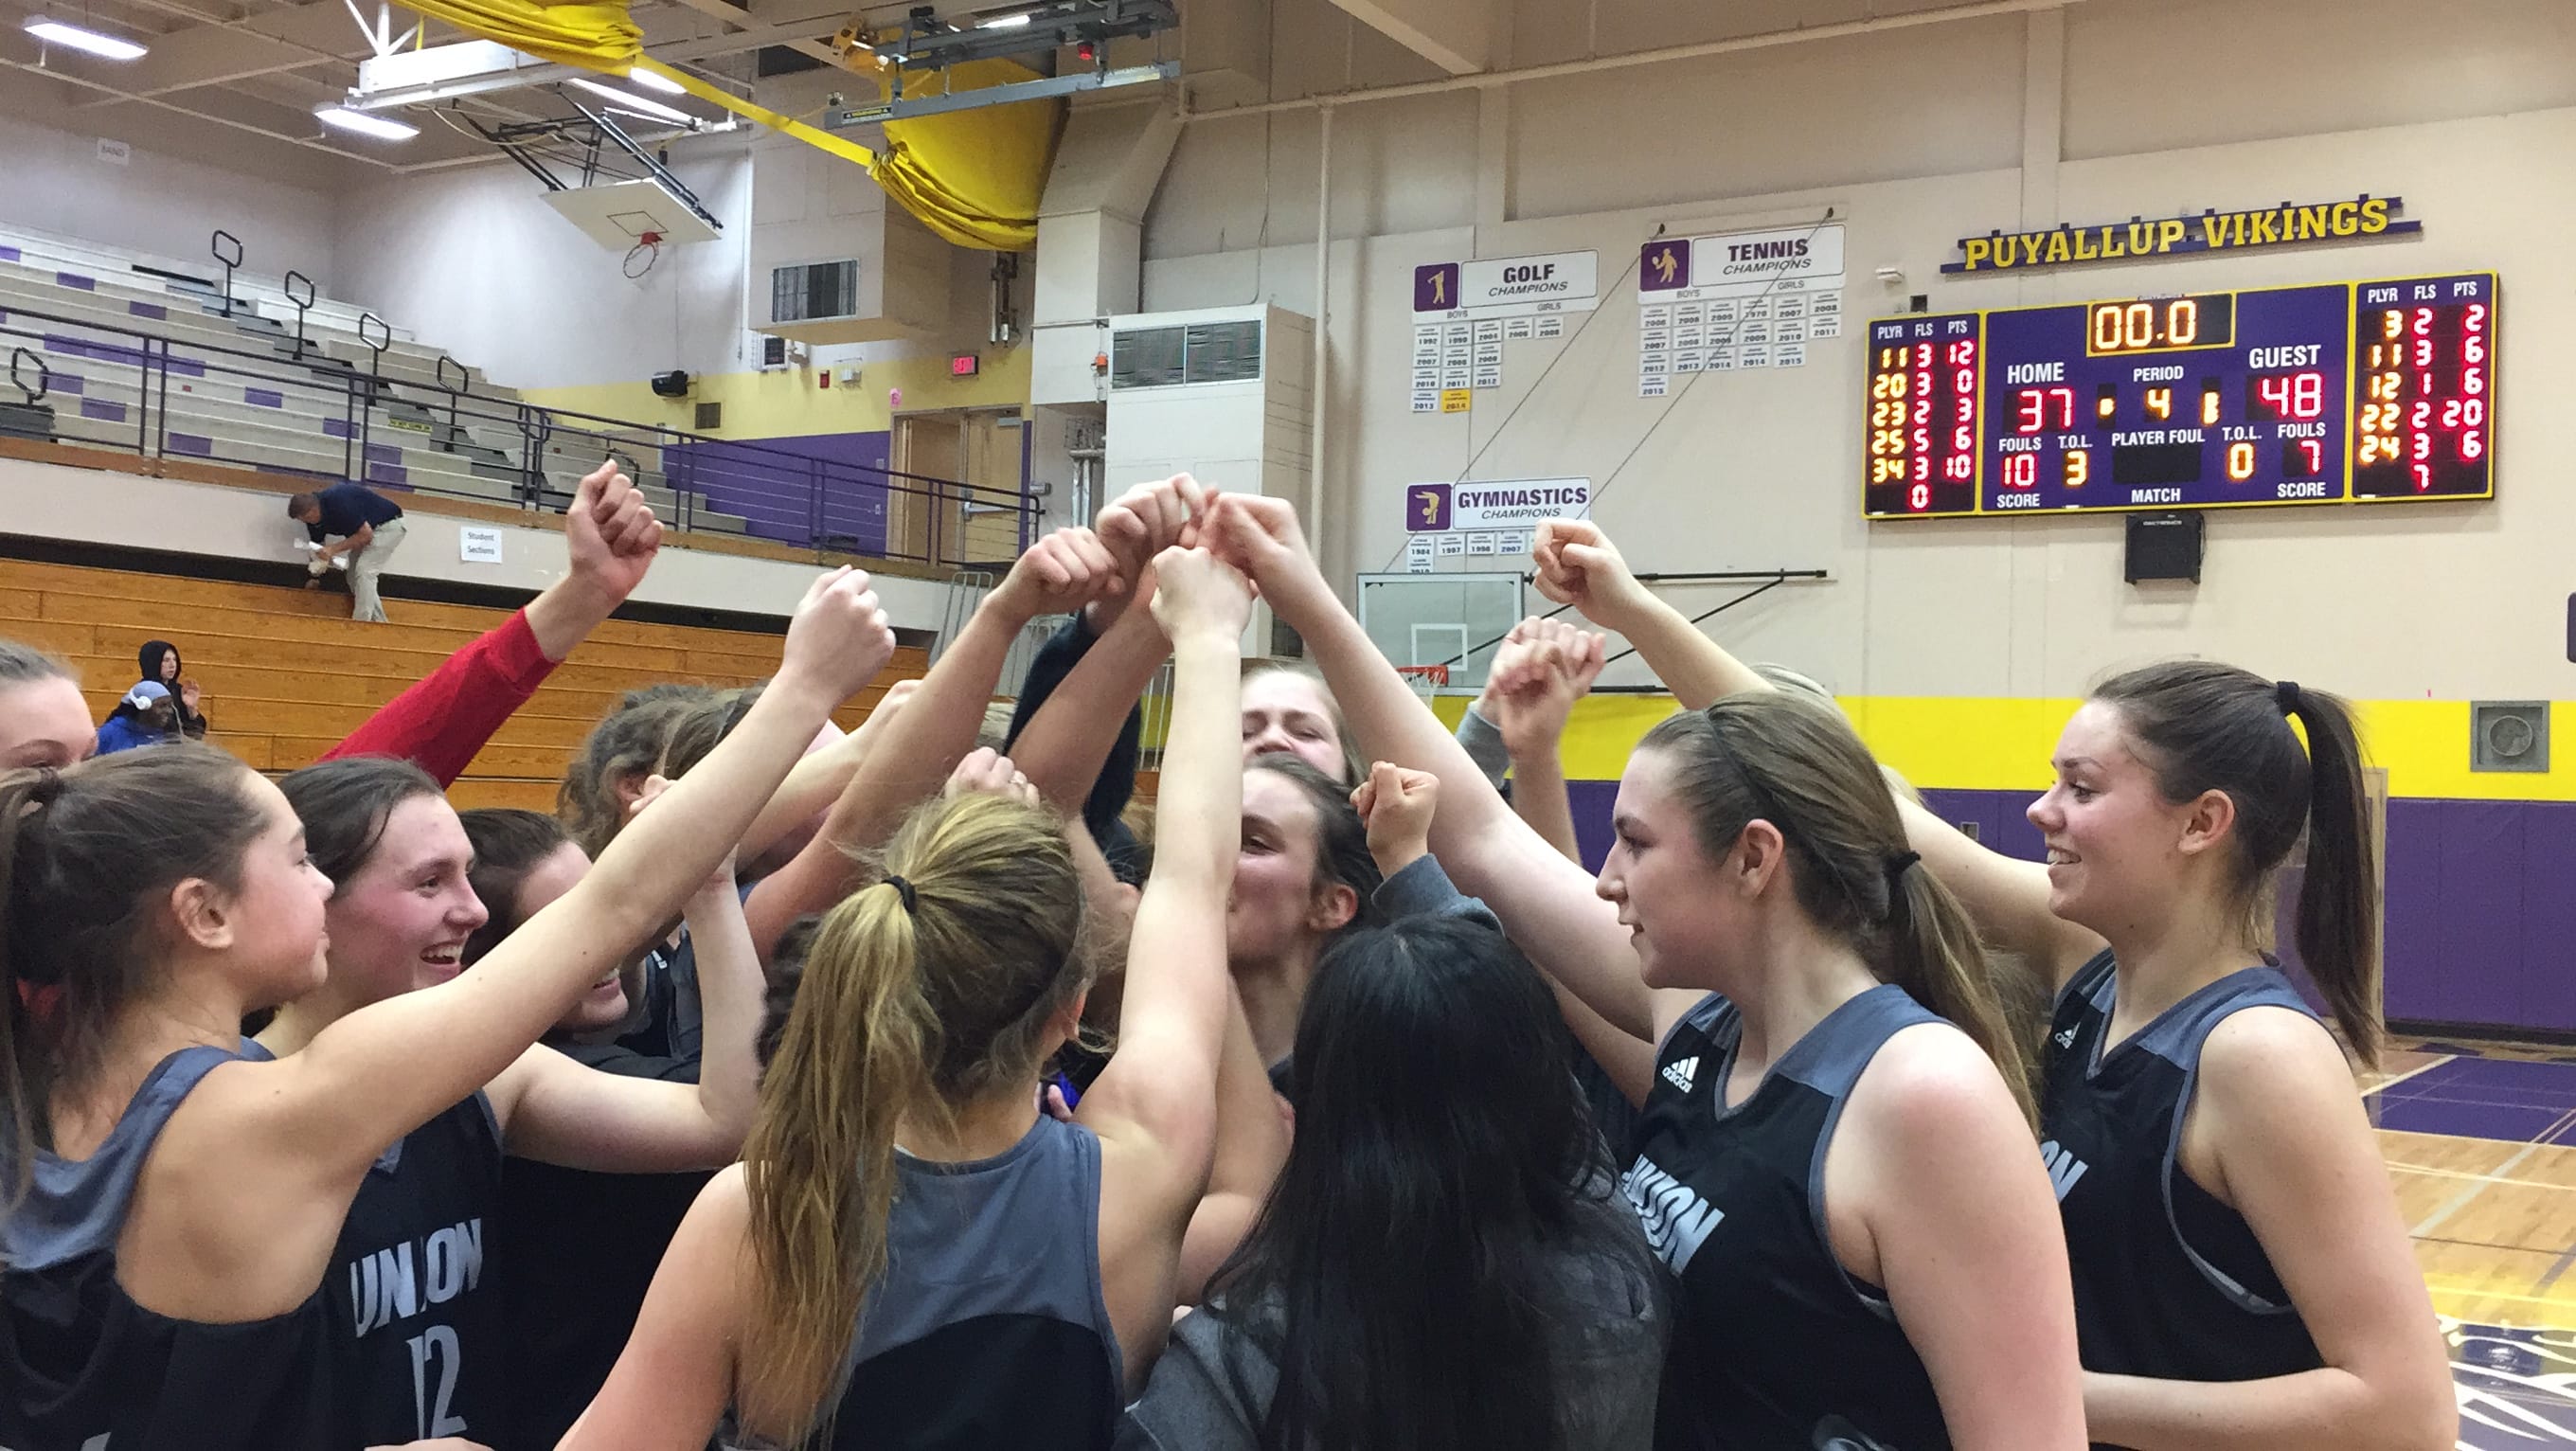 The Union girls basketball team celebrates a 48-37 victory over Todd Beamer in the regional round of the Class 4A state tournament on Friday in Puyallup.